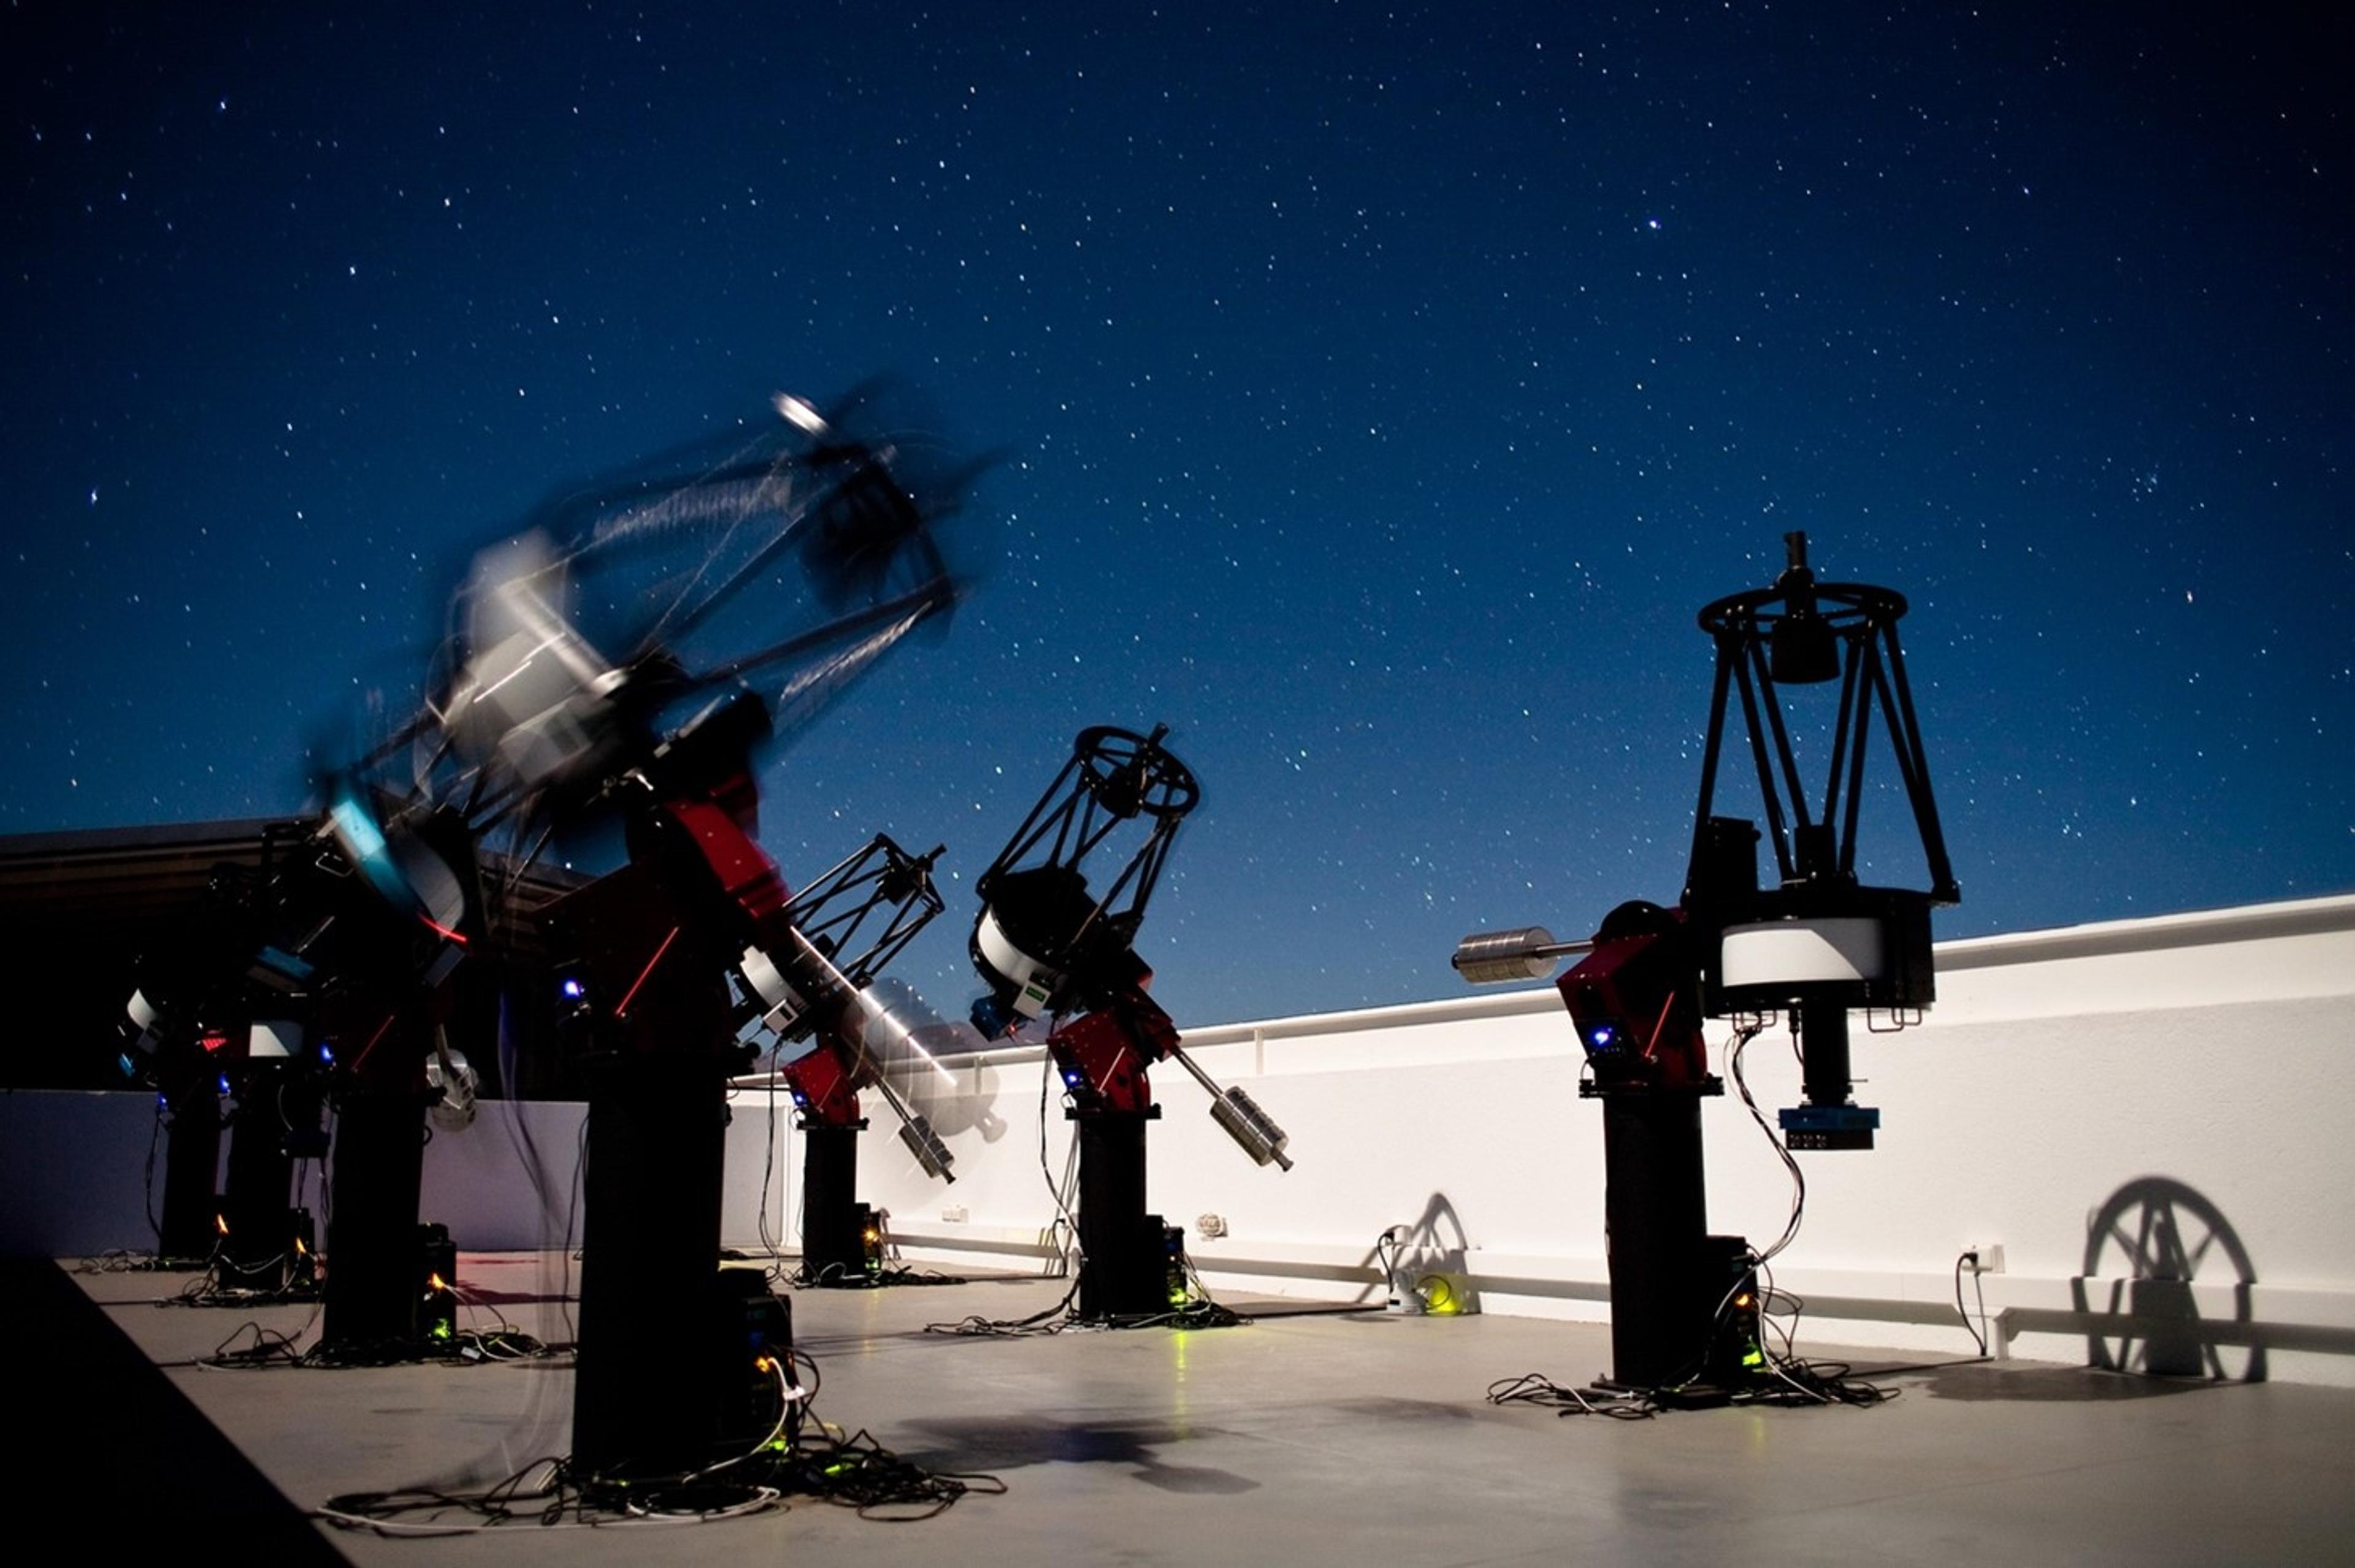 The MEarth Project consists of two sets of 8 telescopes each, one in Arizona and the other in Chile, that search for rocky planets transiting nearby small stars. (credit: Jonathan Irwin)